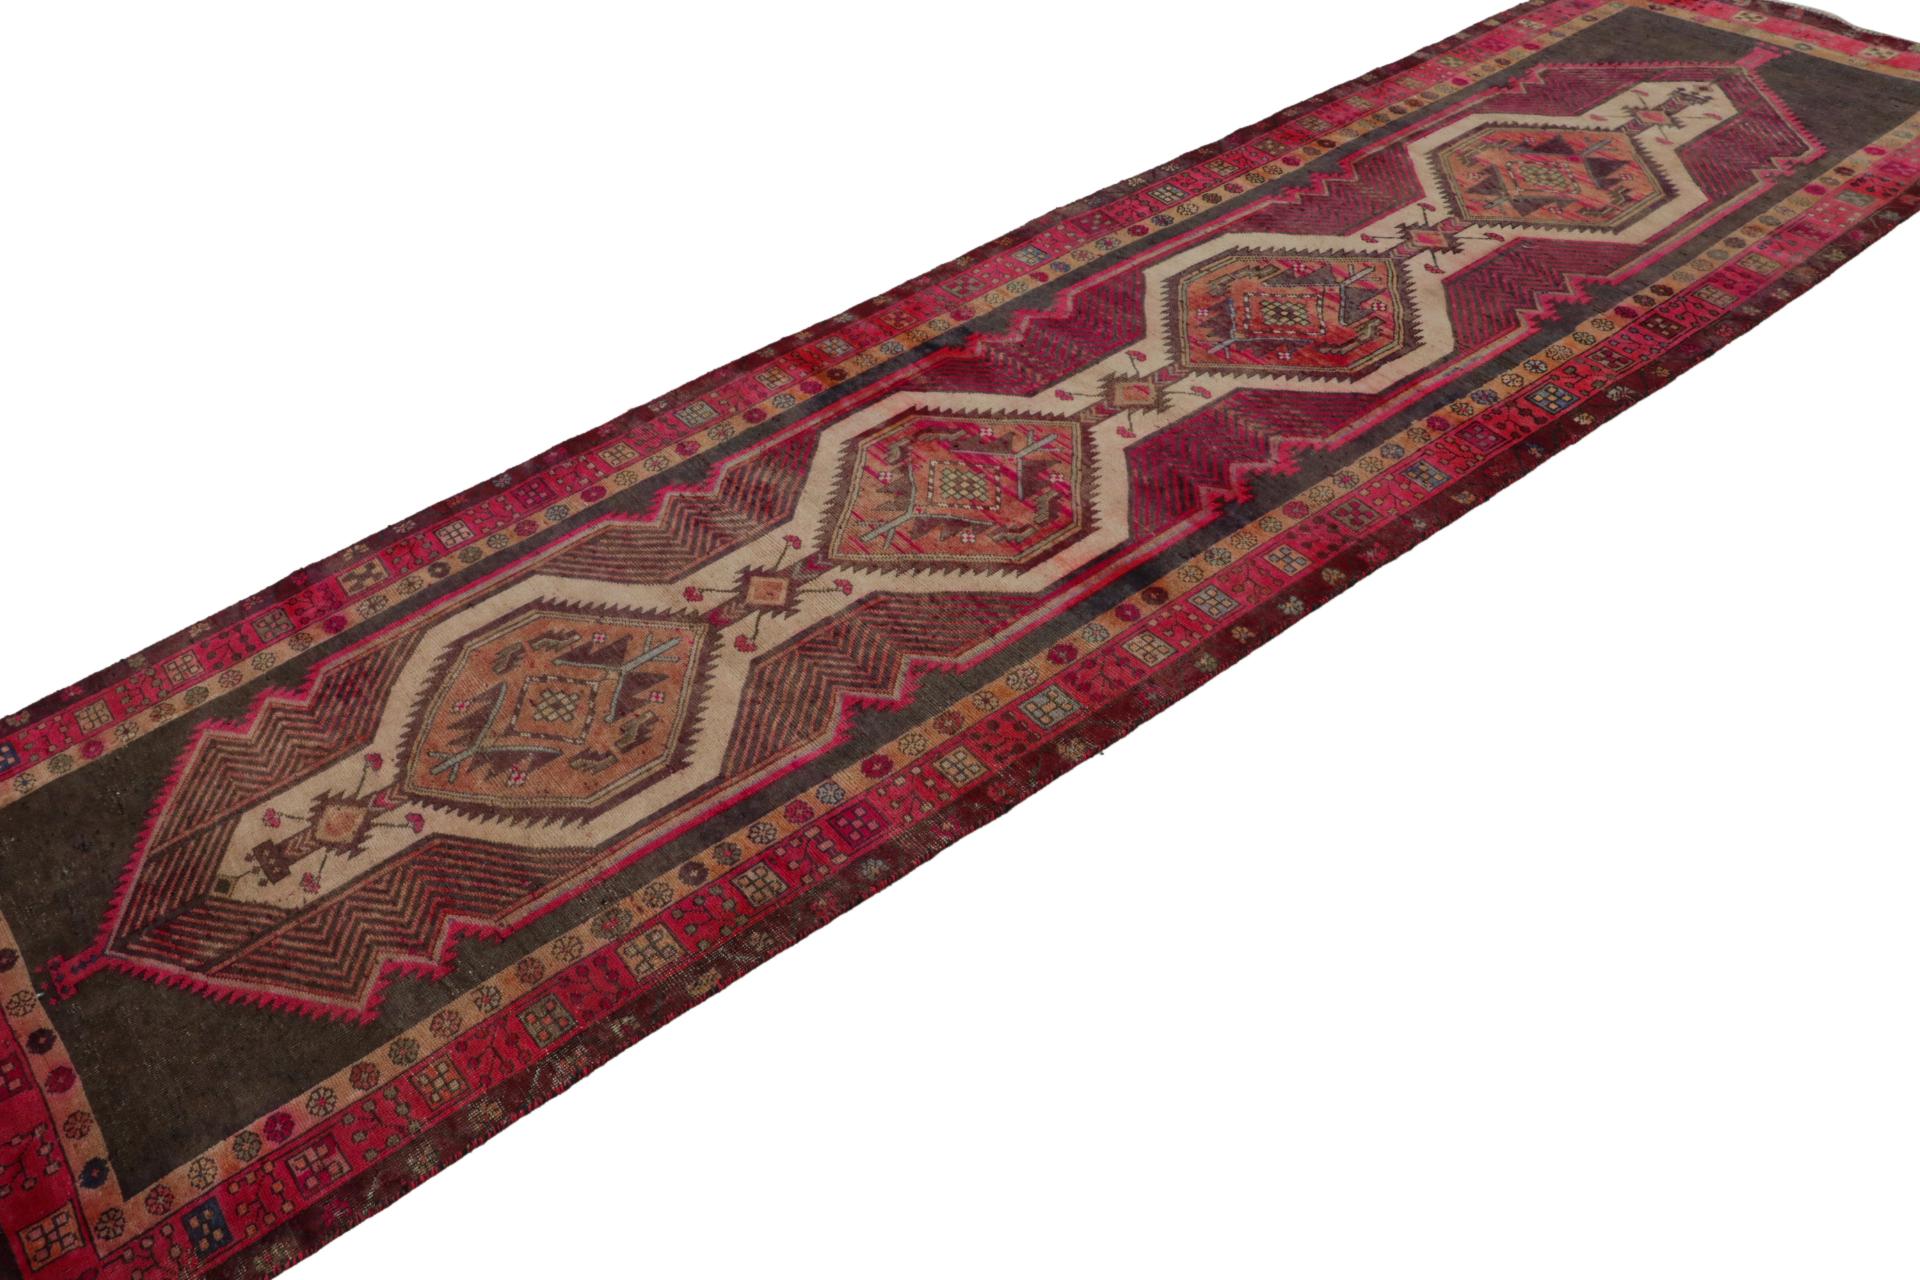 Hand knotted in wool, a 3x12 Persian rug circa 1970-1980 - latest to join Rug & Kilim’s vintage selections.

On the Design:

The runner enjoys geometric patterns in red and beige-brown. Keen eyes will admire the repetition lending a refined sense of